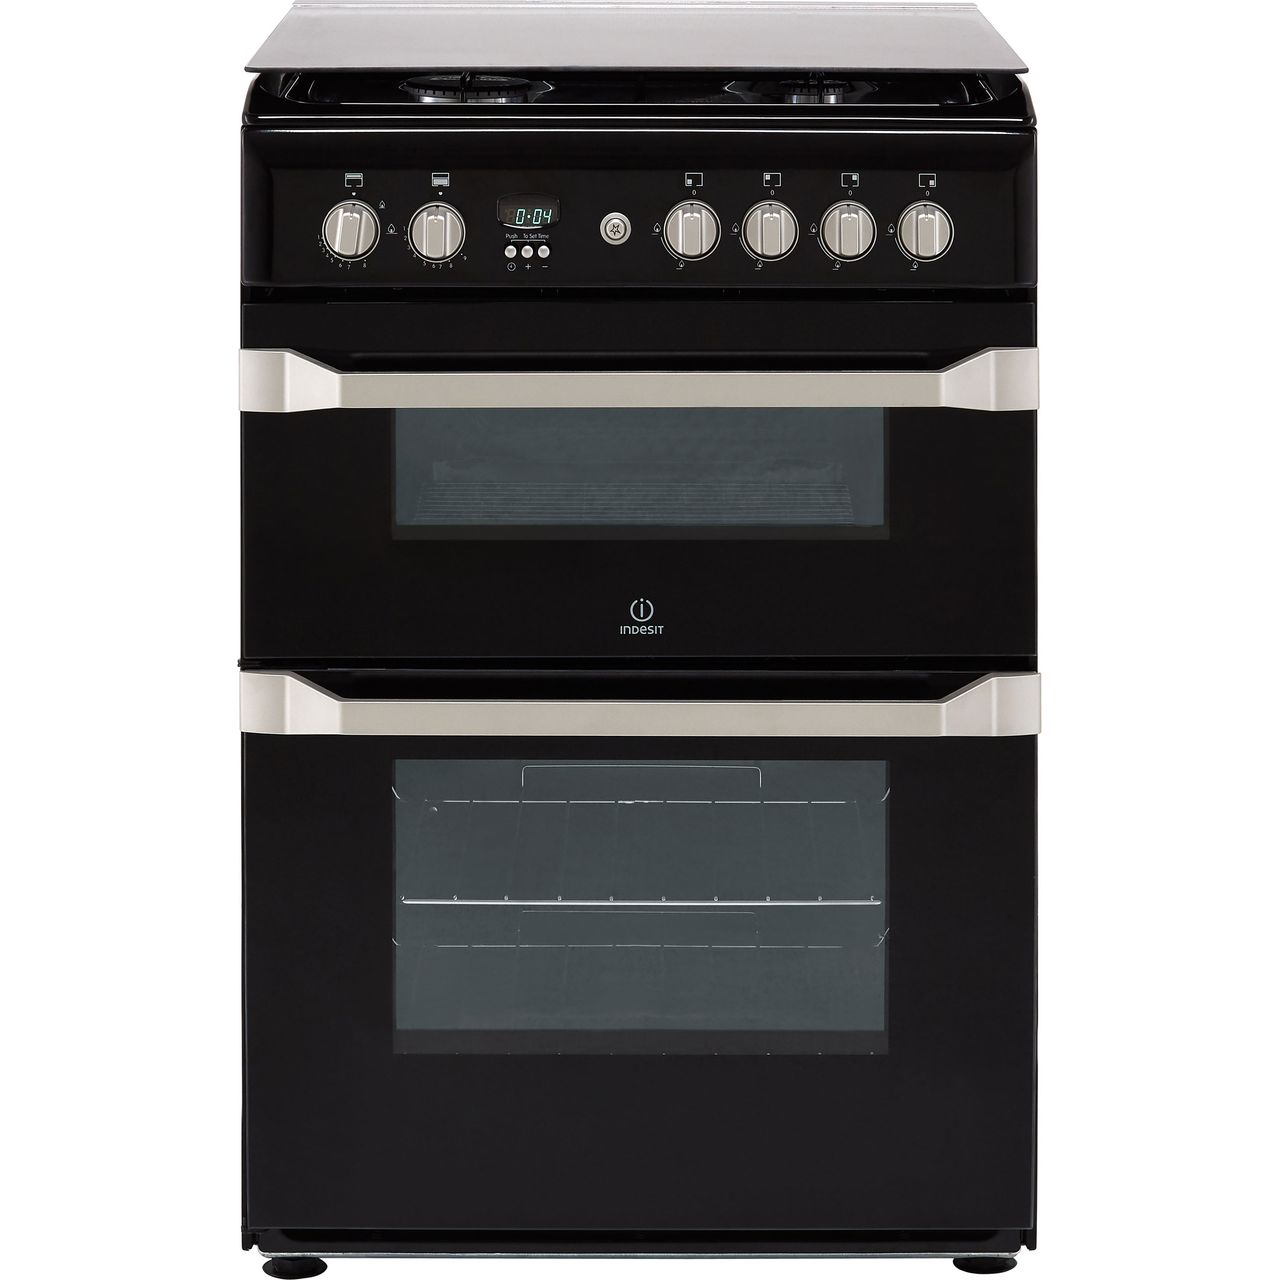 Indesit Advance ID60G2K Gas Cooker Review